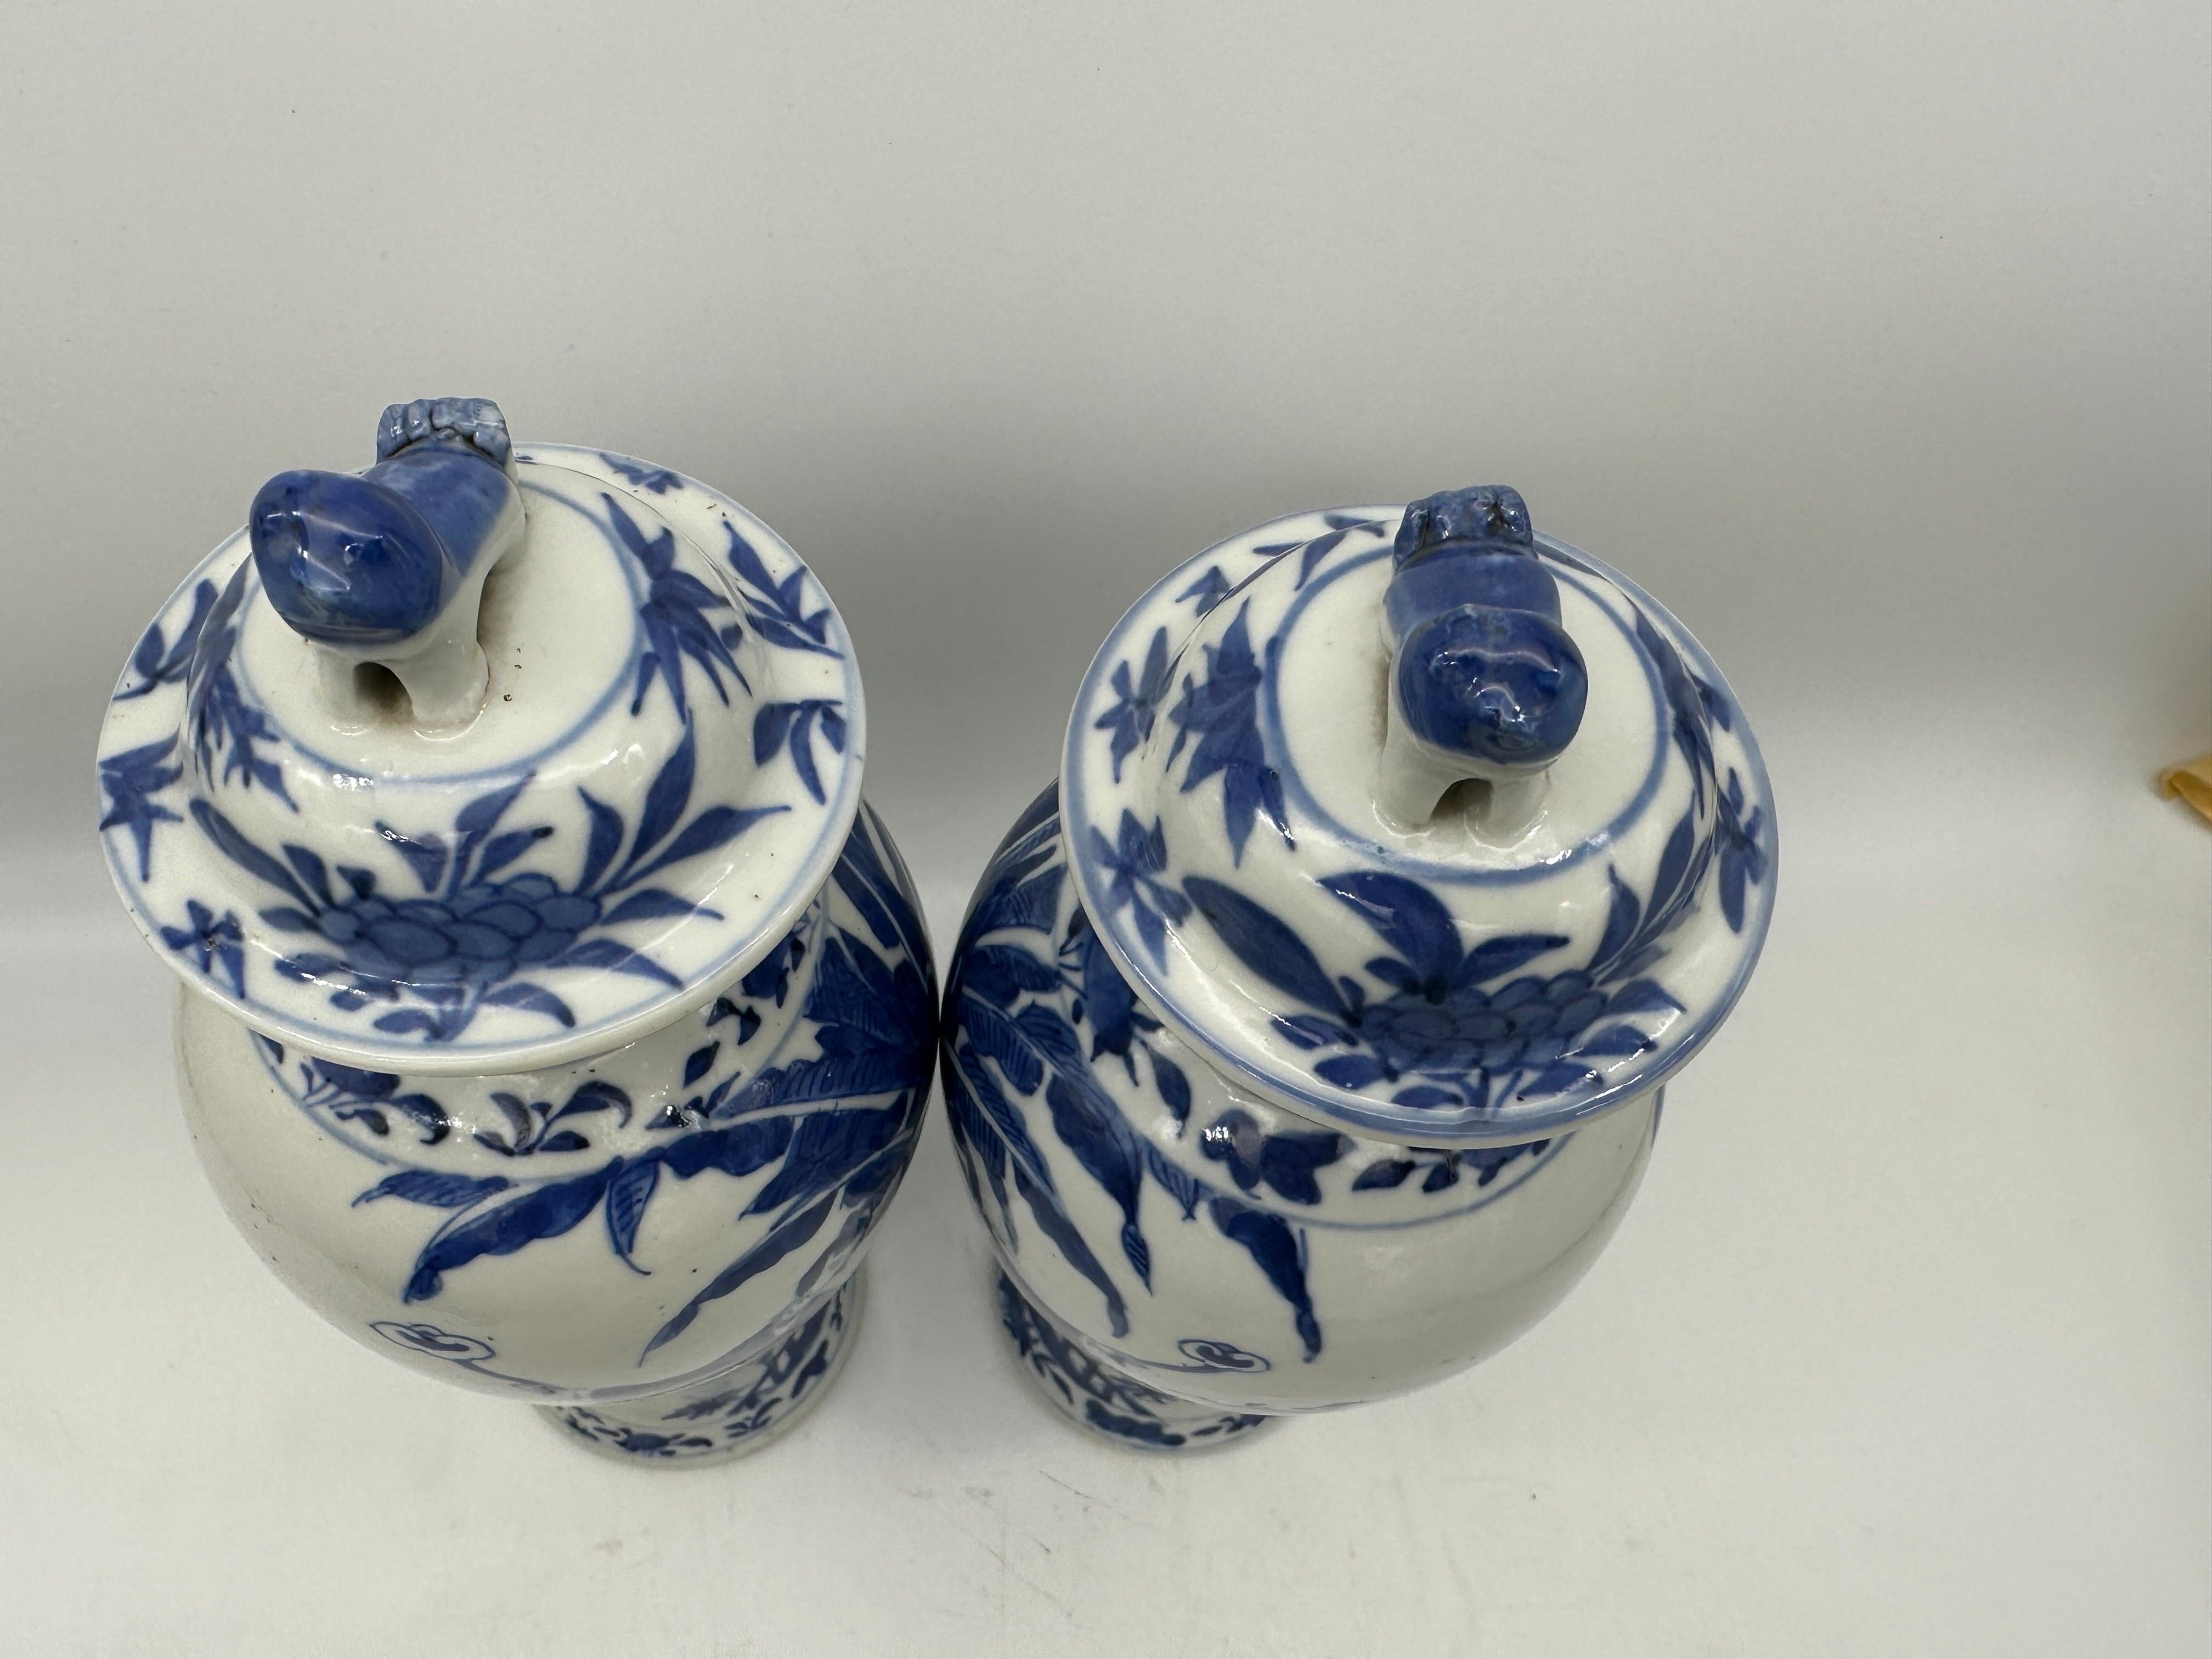 18th Century Antique Pair of Chinese Blue and White Porcelain Jars and Covers For Sale 8